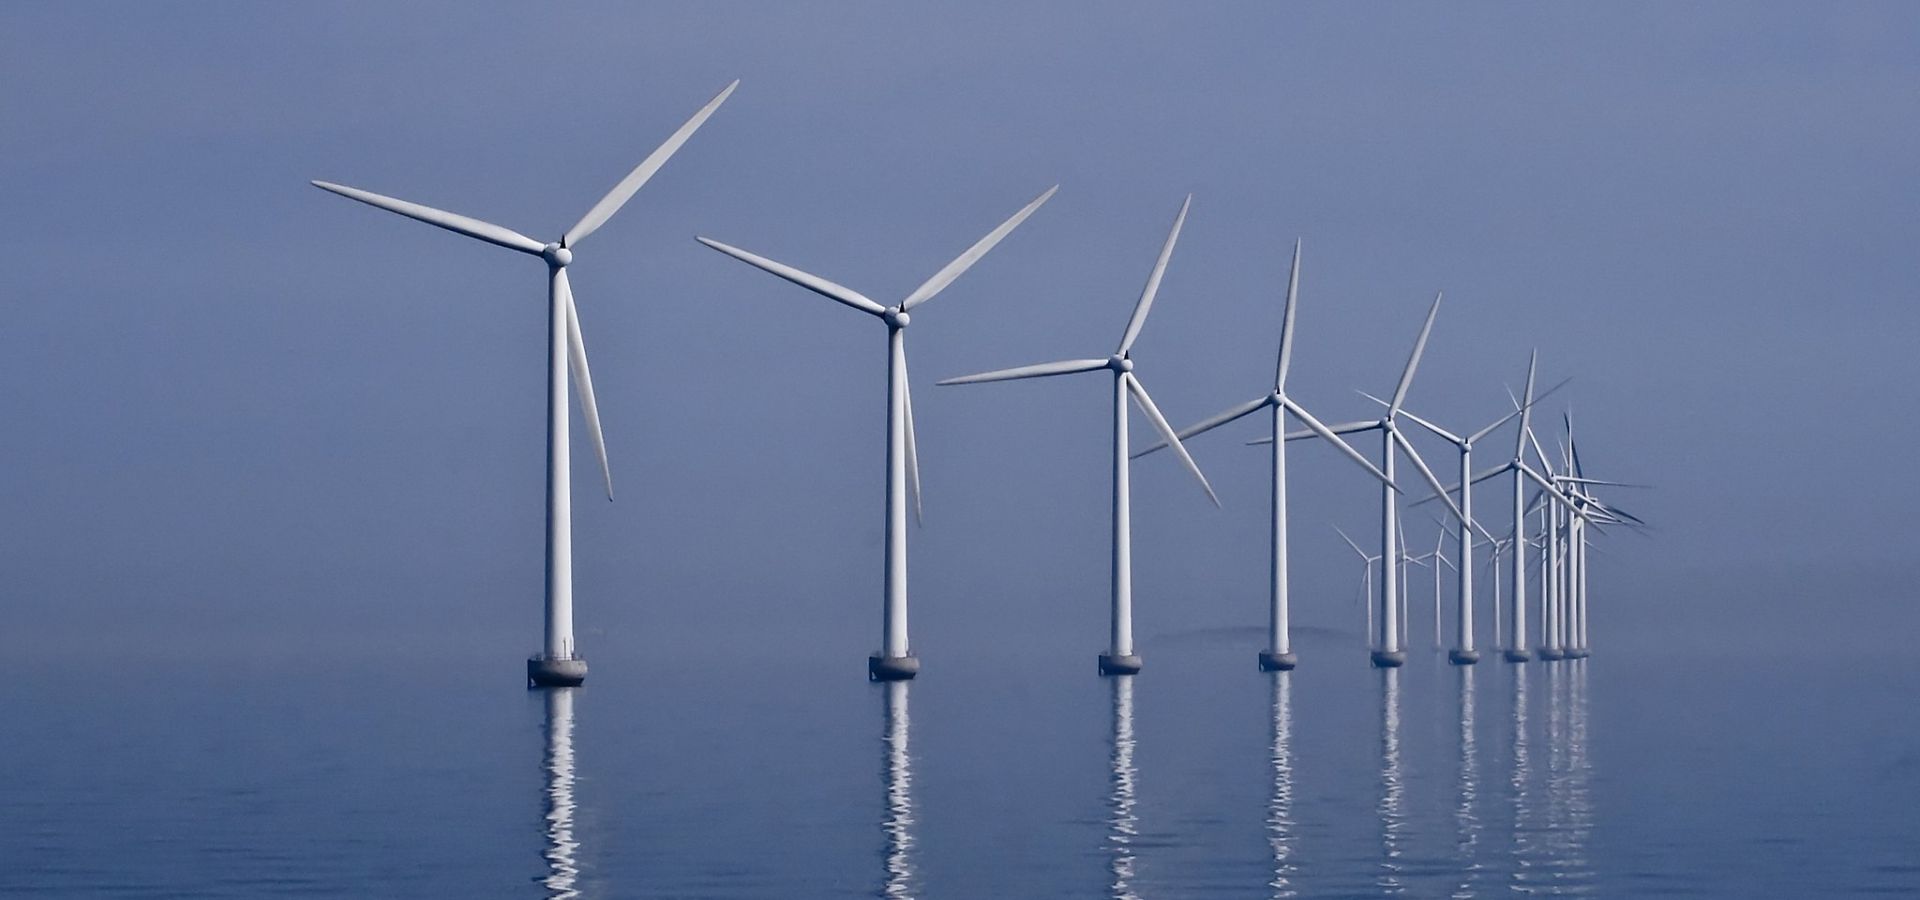 Groups warn that political conditions are hampering the growth of Germany’s critical wind energy sector, with the vital growth of both on and offshore generation capacities suffering.groups warn that political conditions are hampering the growth of Germany’s critical wind energy sector, with the vital growth of both on and offshore generation capacities suffering.